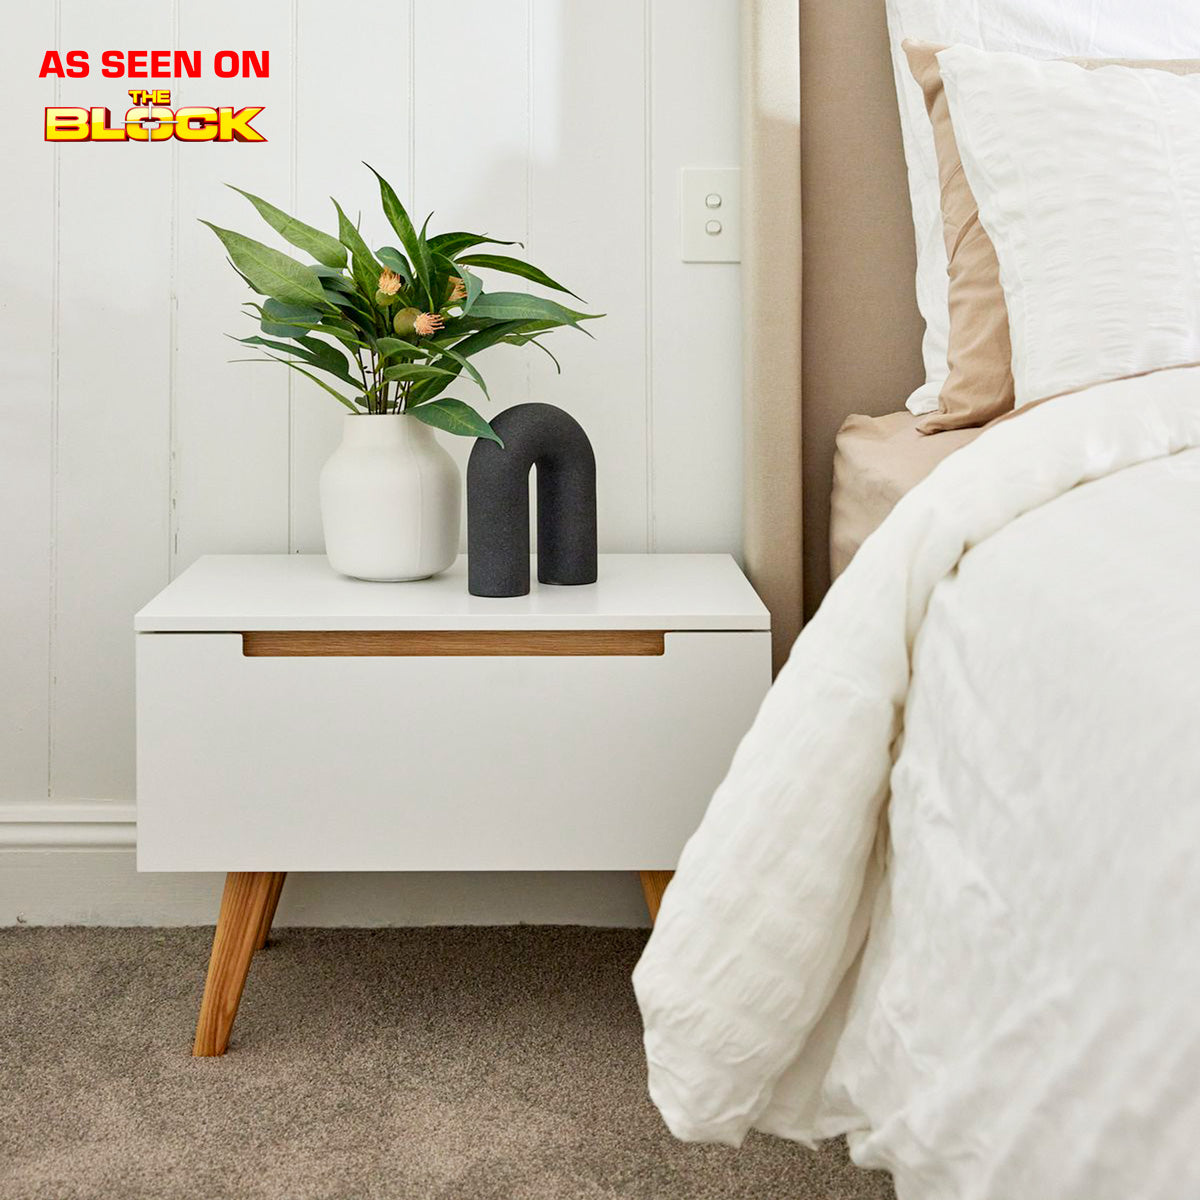 Coastal Wooden Bedside Table With White Drawers (Bondi) – Tommy Swiss